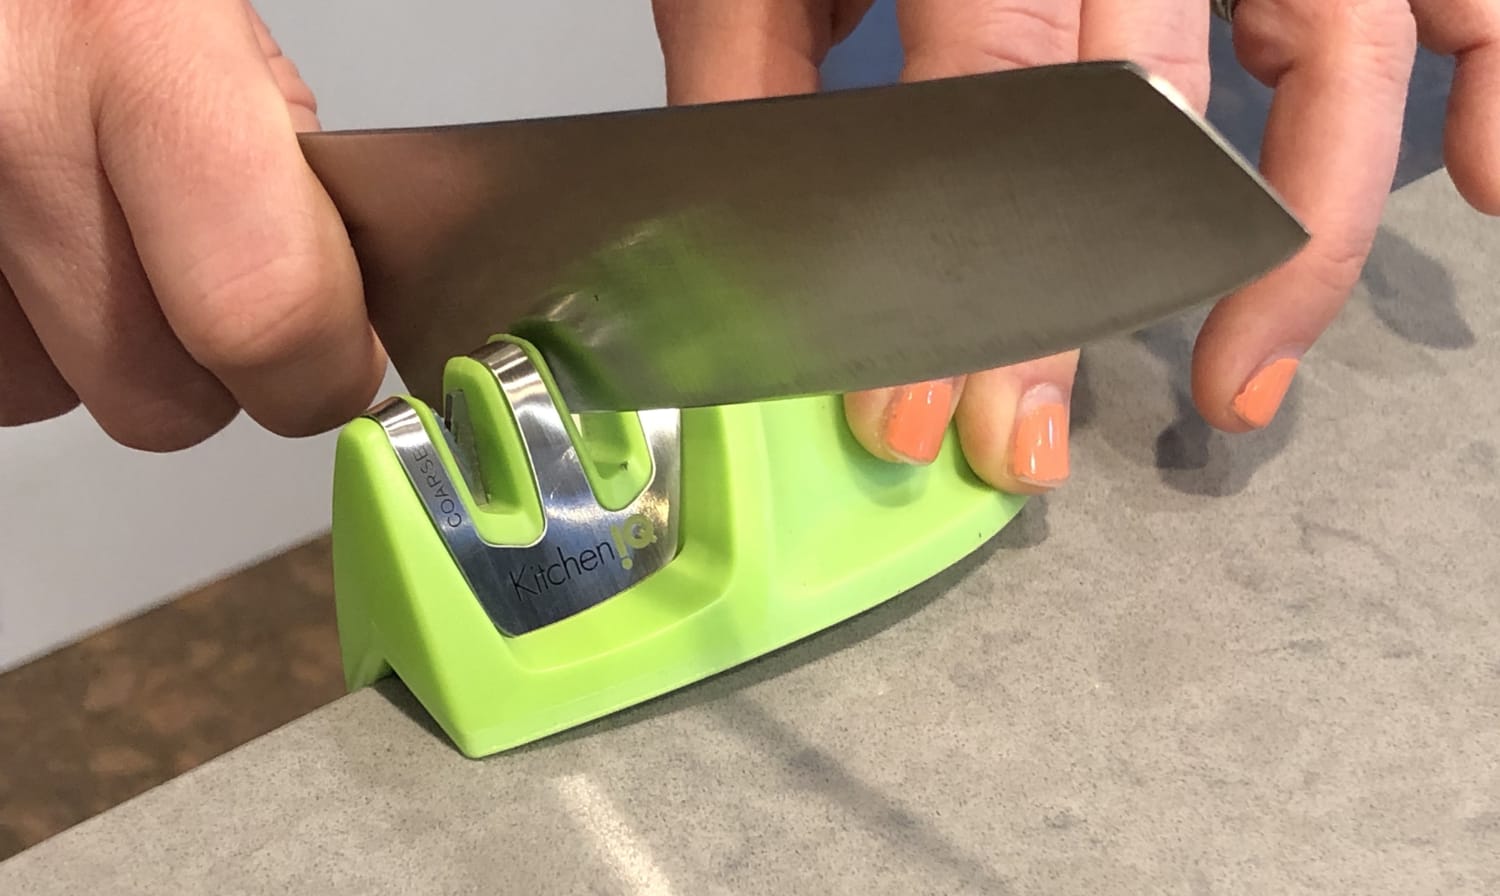 How To Sharpen A Serrated Knife - Virginia Boys Kitchens